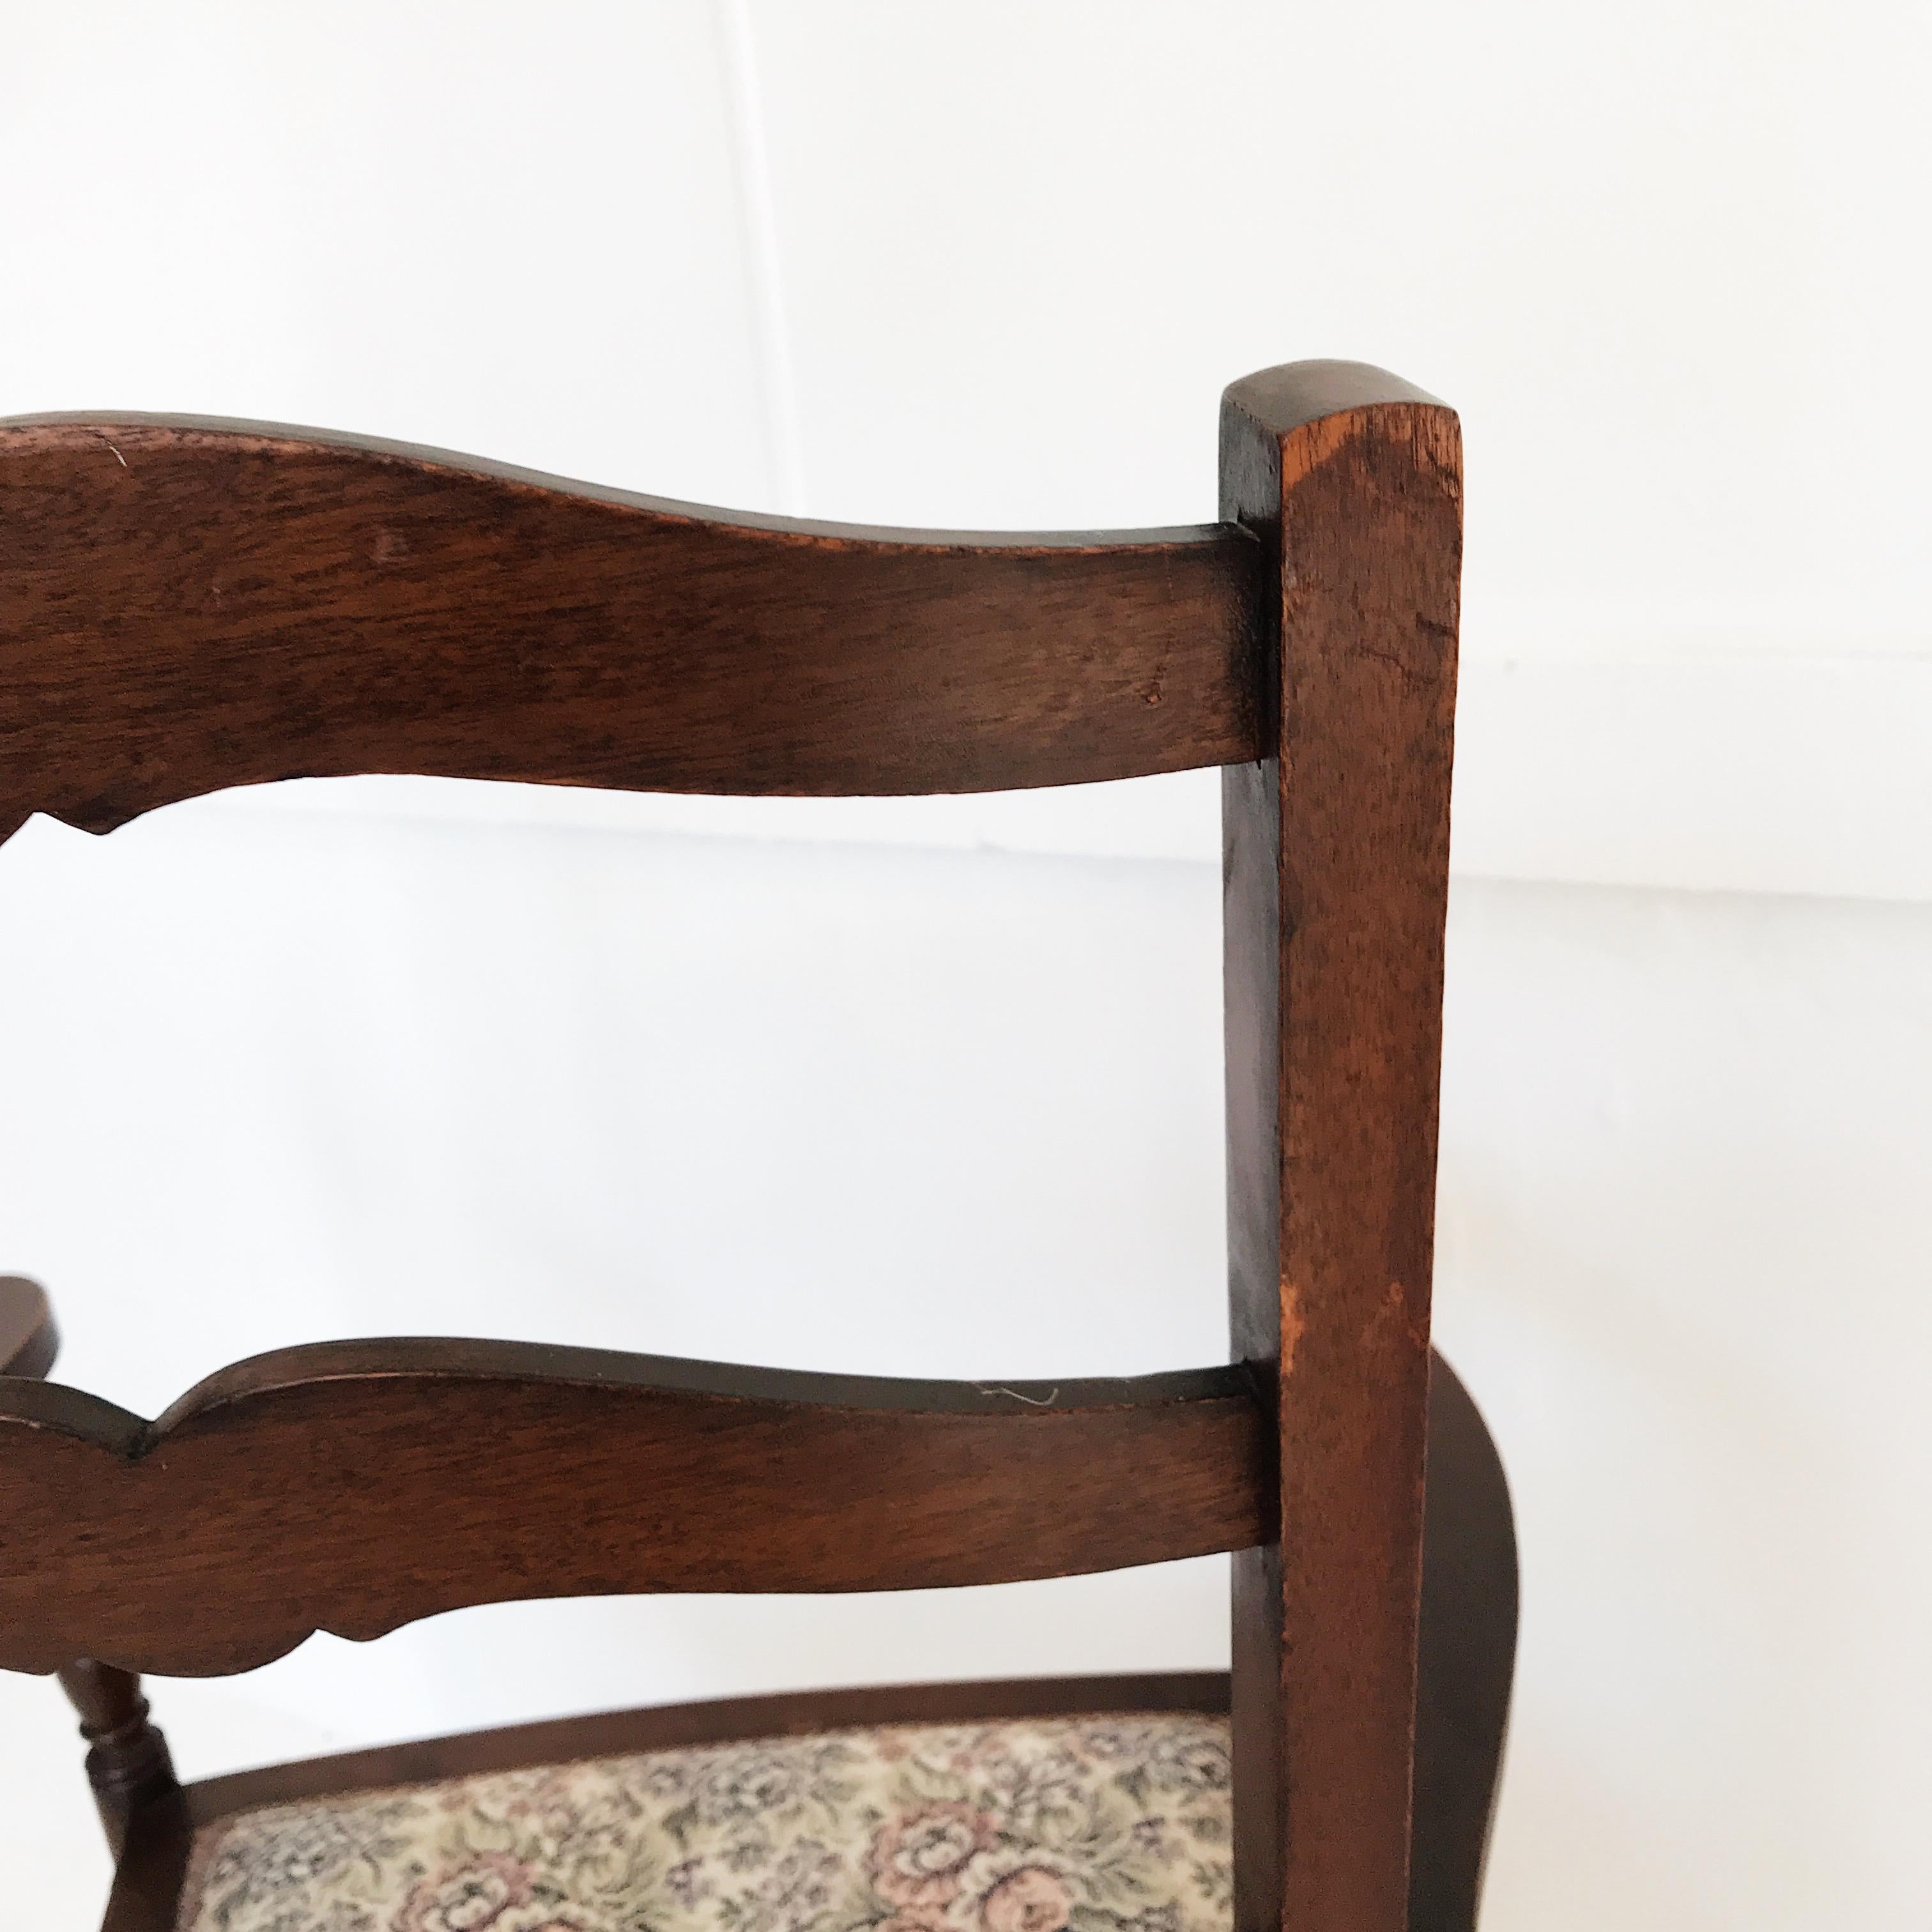 Upholstery Early-20th Century Ladder Back Chair by Beard Watson Limited, Sydney, Australia For Sale